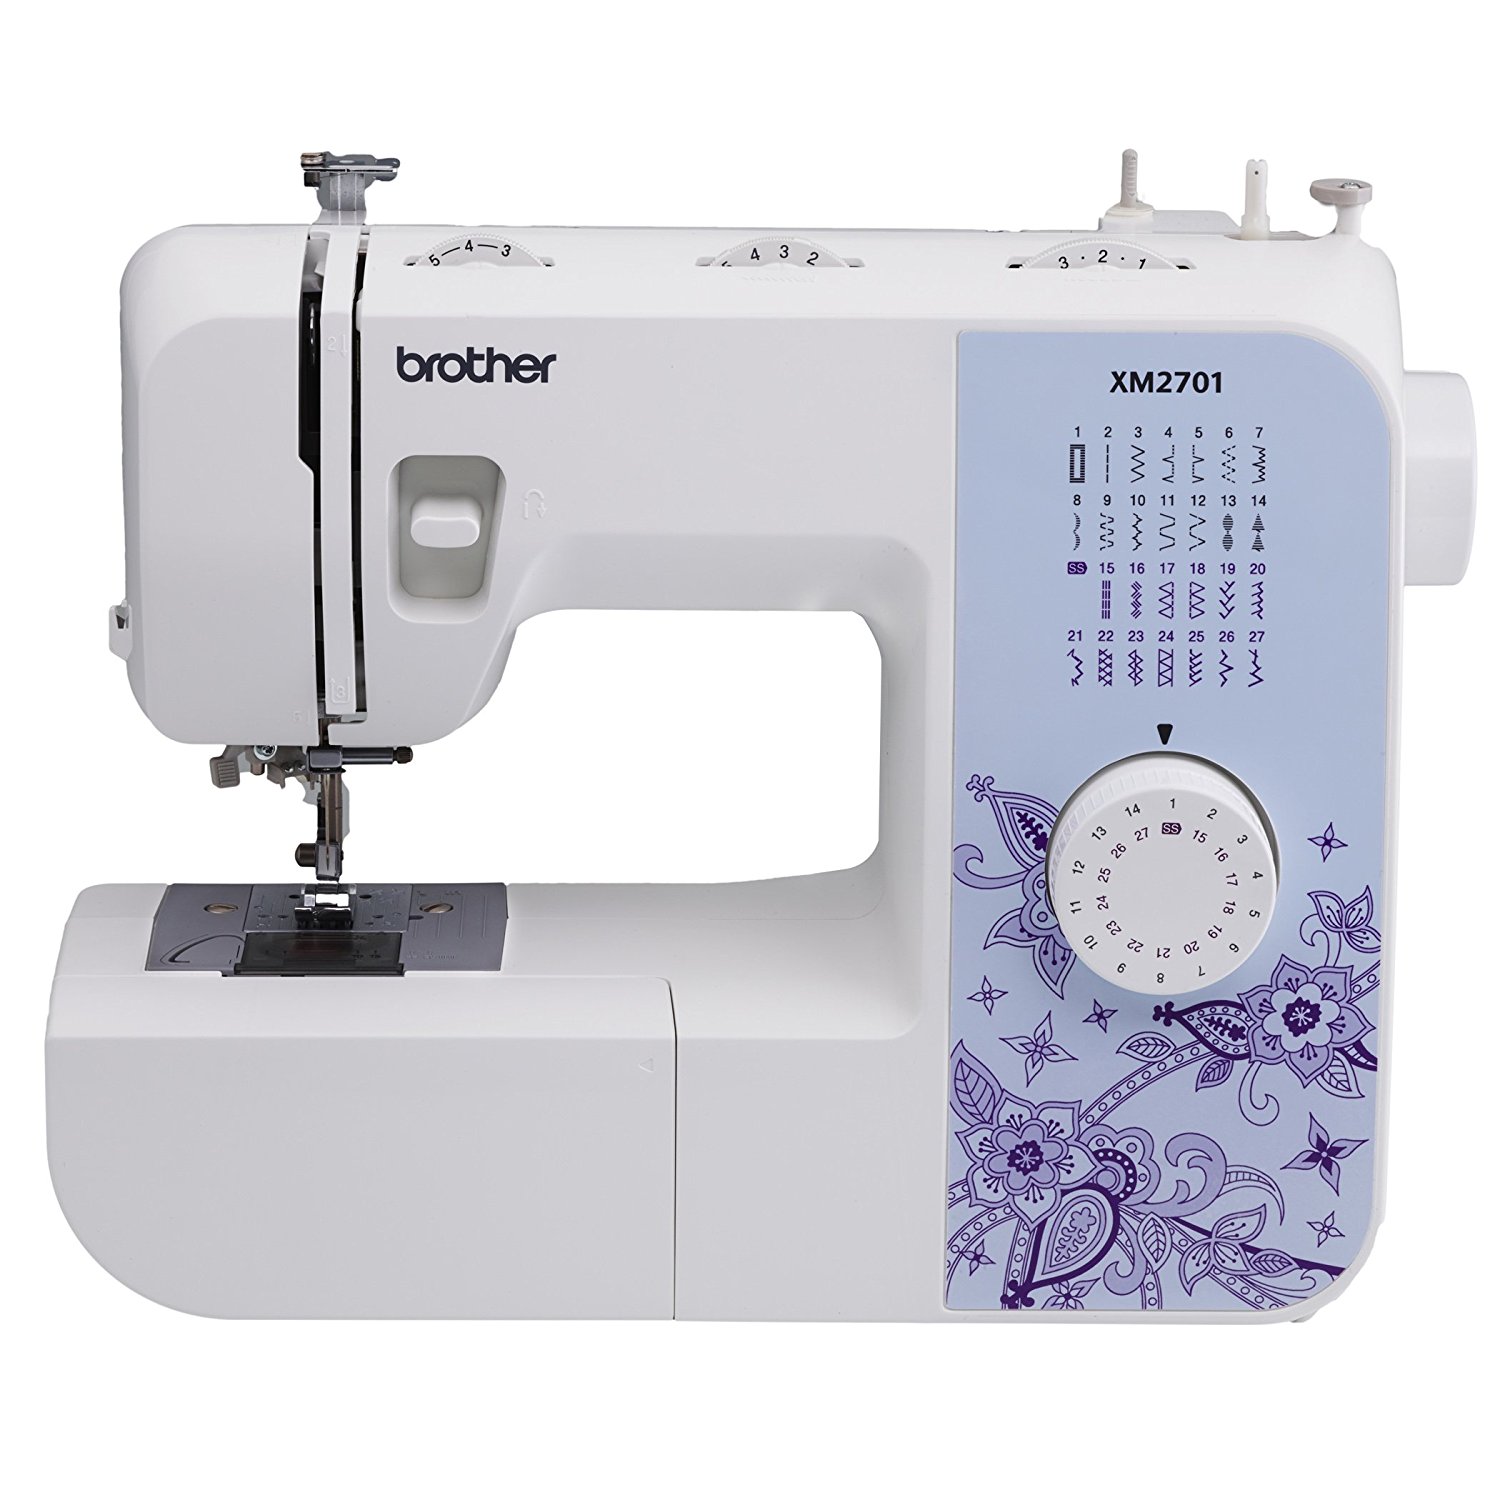 Best Brother Sewing & Embroidery Machine Review: Short on cash but still want a Brother product? Try this!